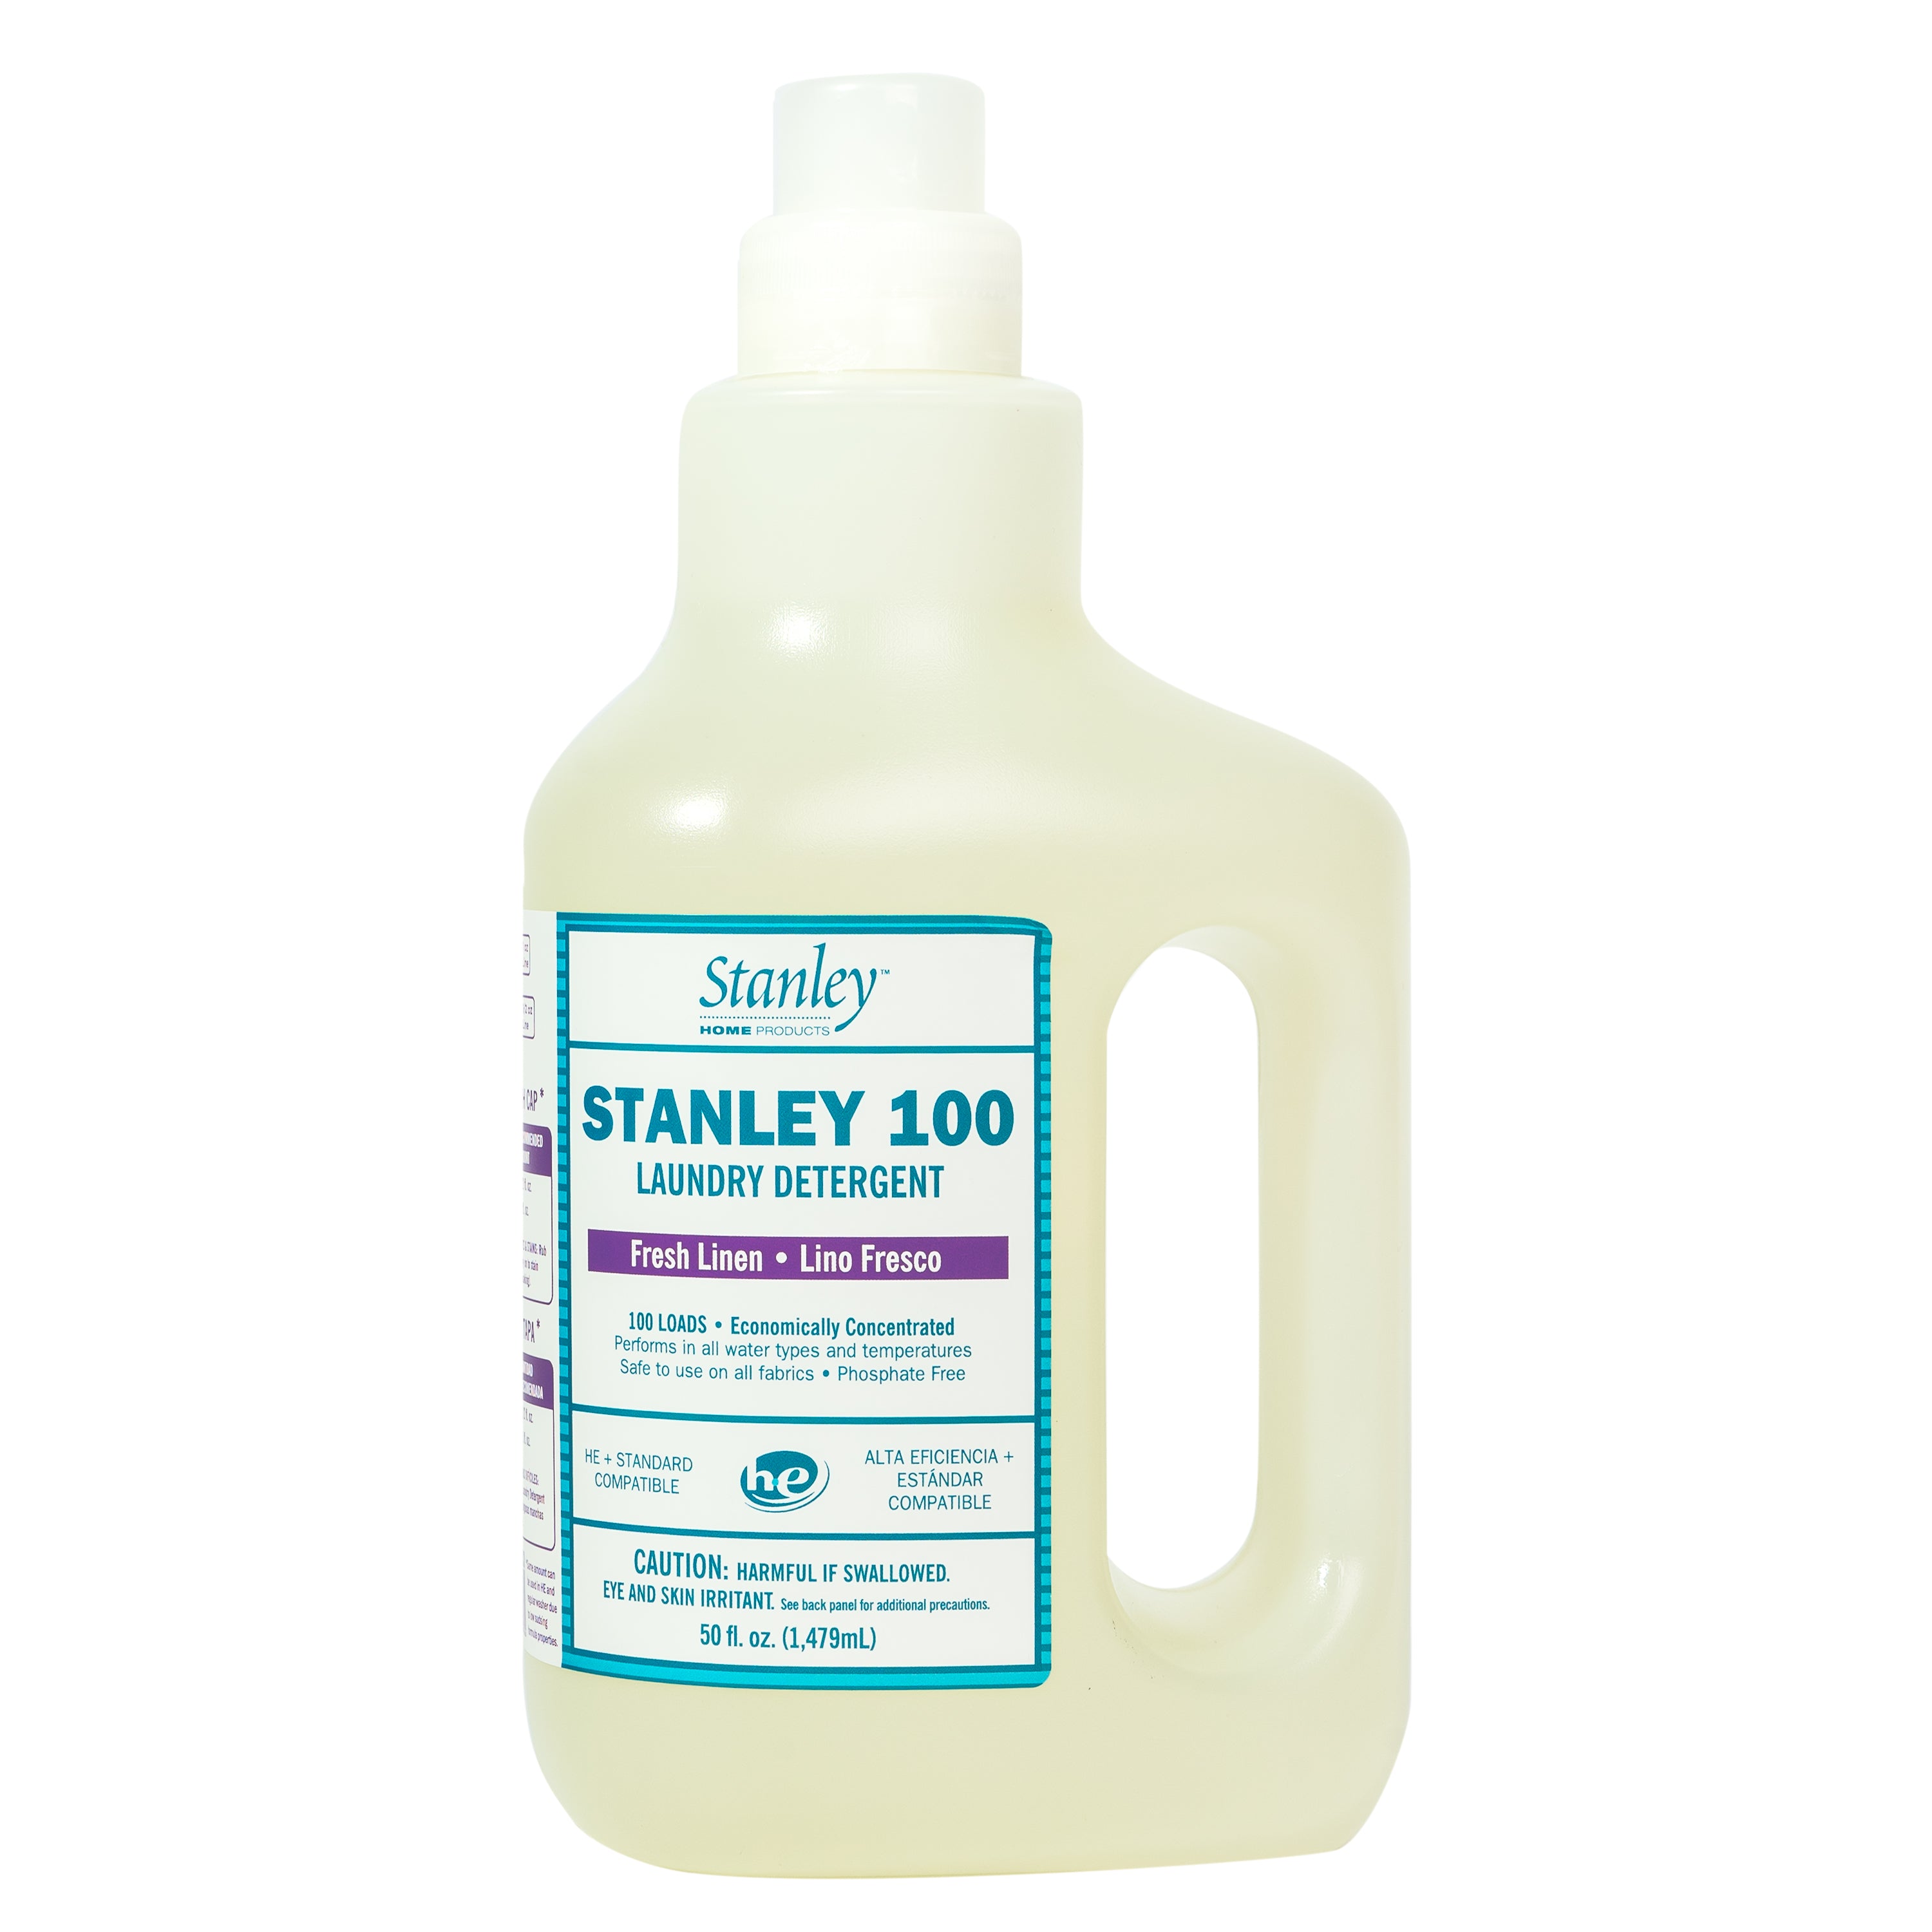 Stanley Home Products Bowl Refresher Concentrate